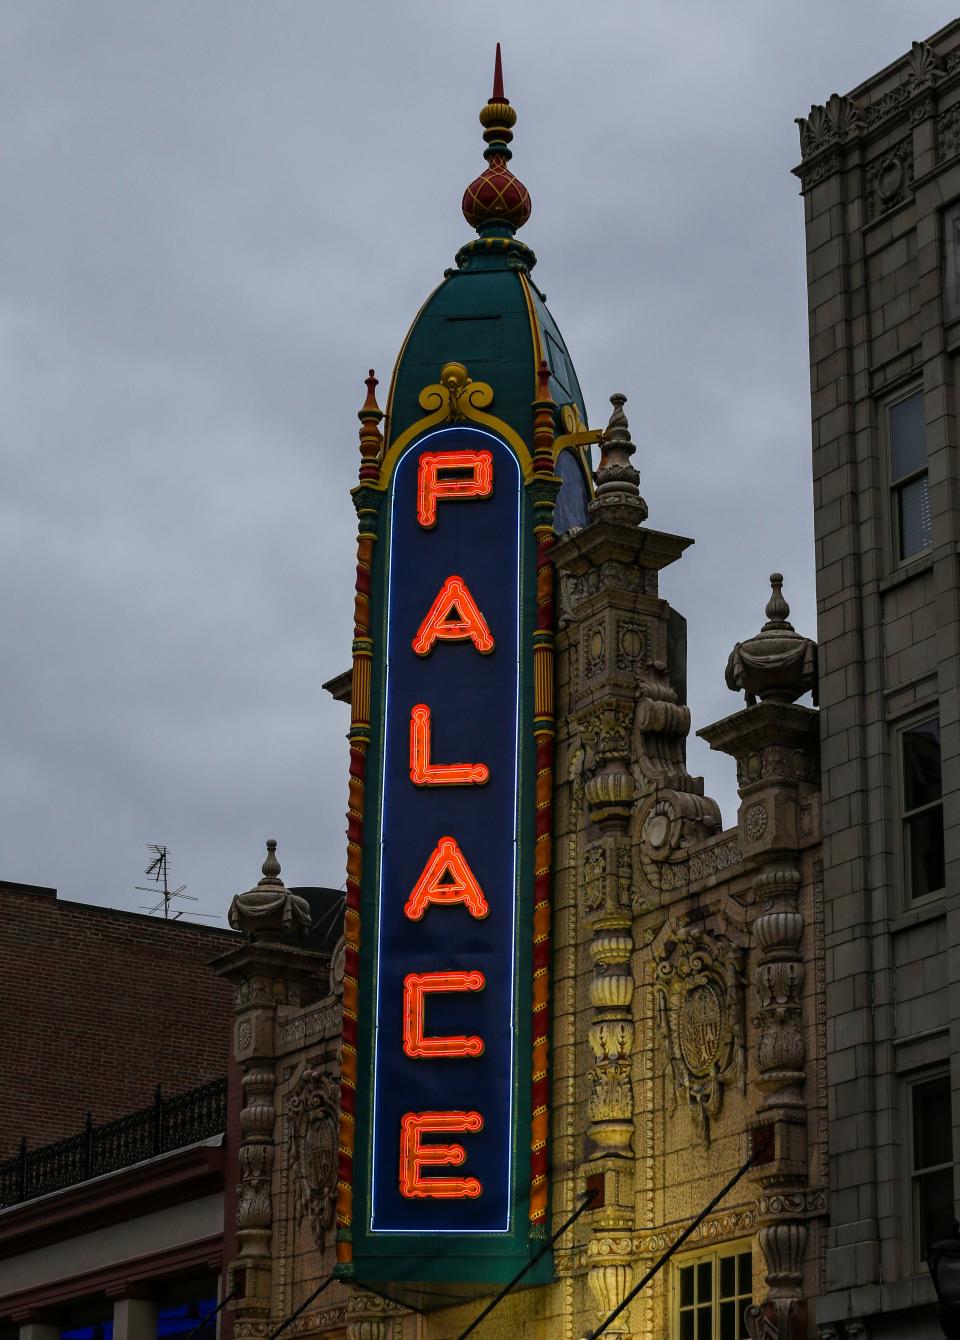 The Louisville Palace Theatre sign on Fourth Street in downtown Louisville, Ky. The music venue opened in 1928. Jacket  Dec. 9, 2019